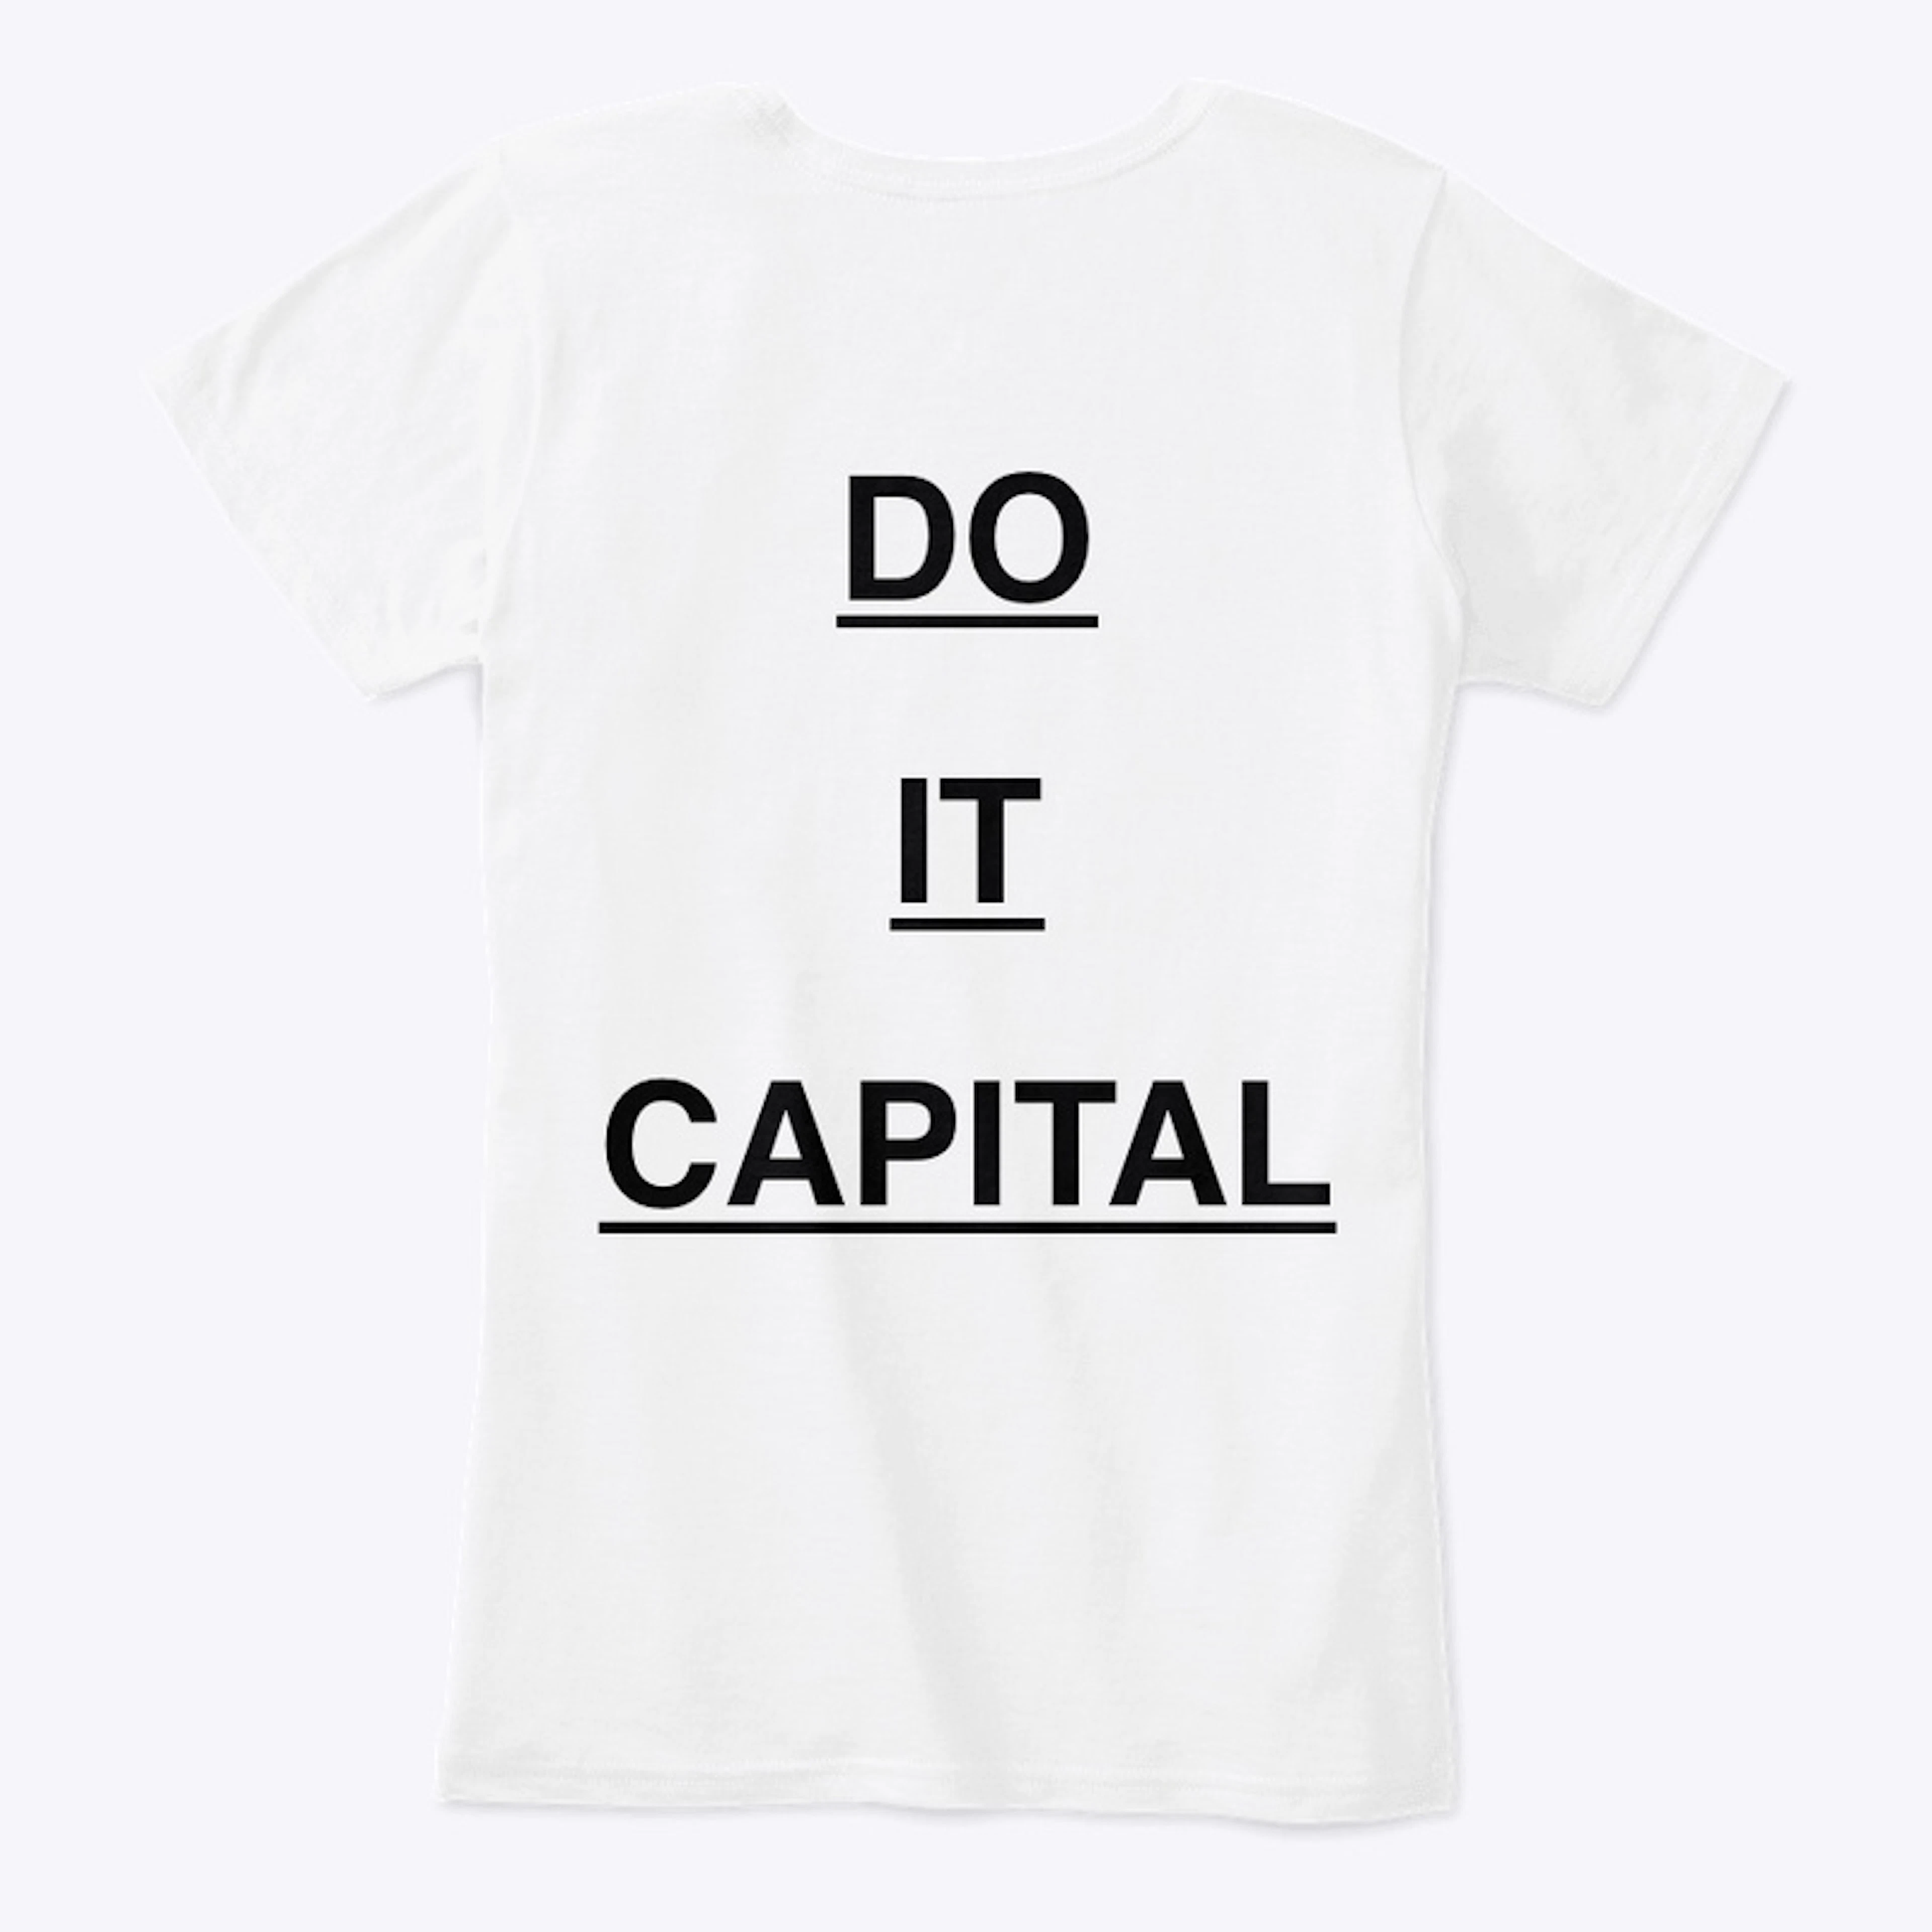 DO IT CAPITAL BY DIVIDENDS